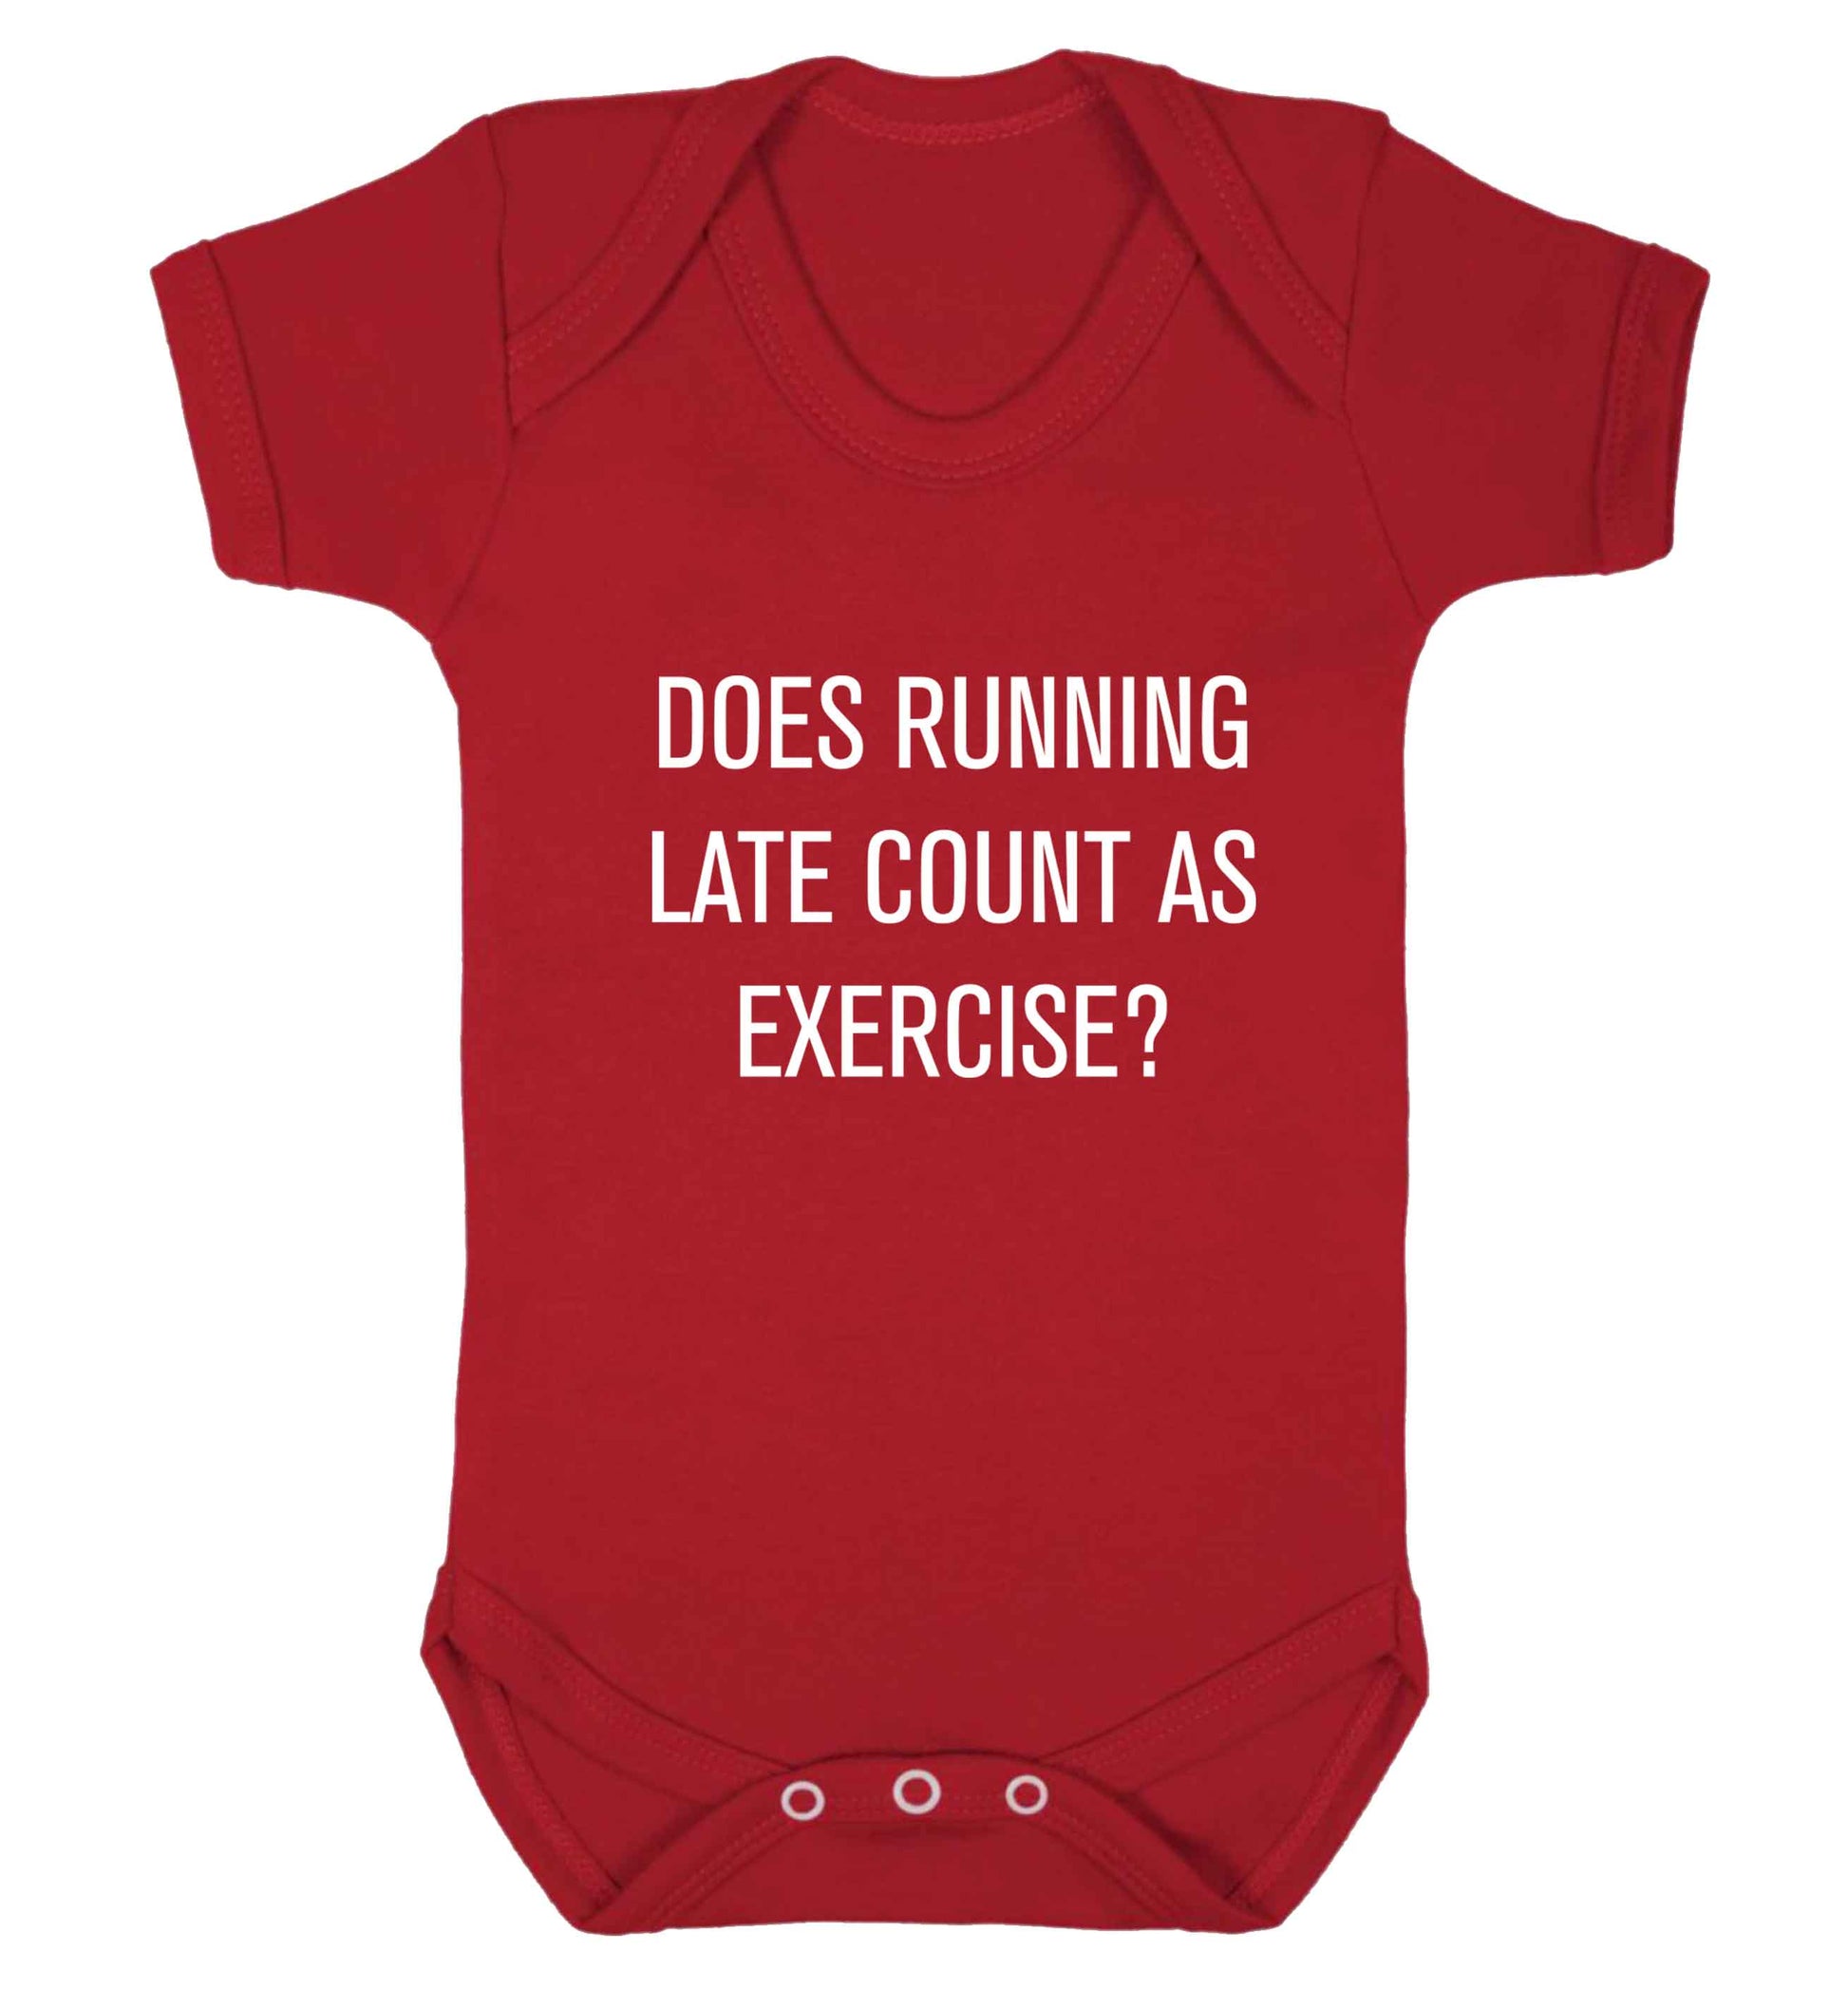 Does running late count as exercise? baby vest red 18-24 months